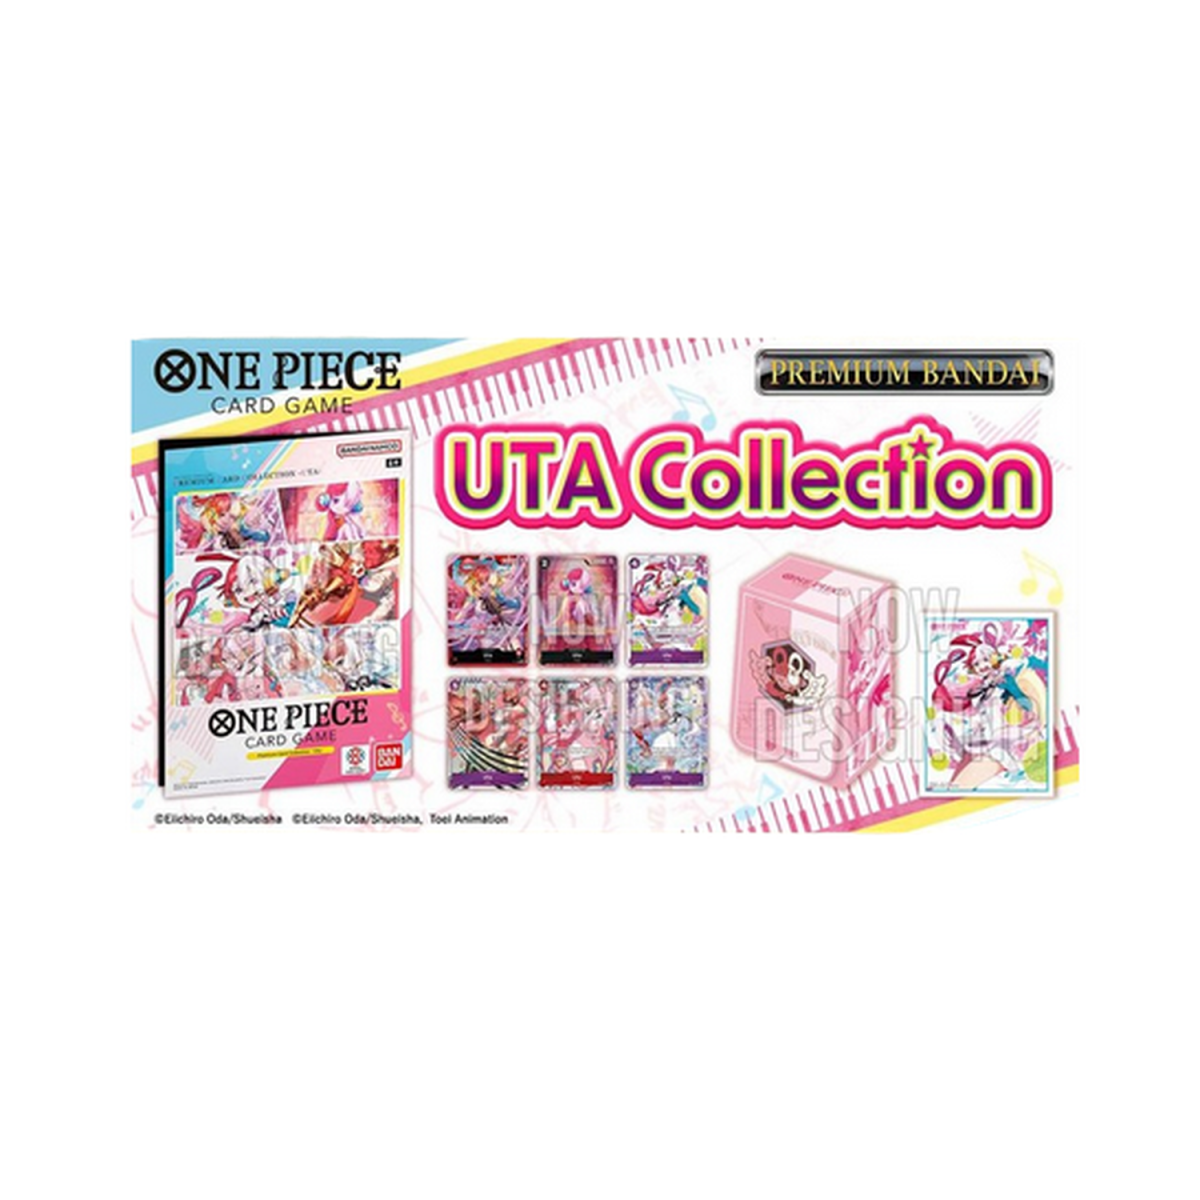 Item One Piece Card Game - Coffret - Uta Collection - Anglais